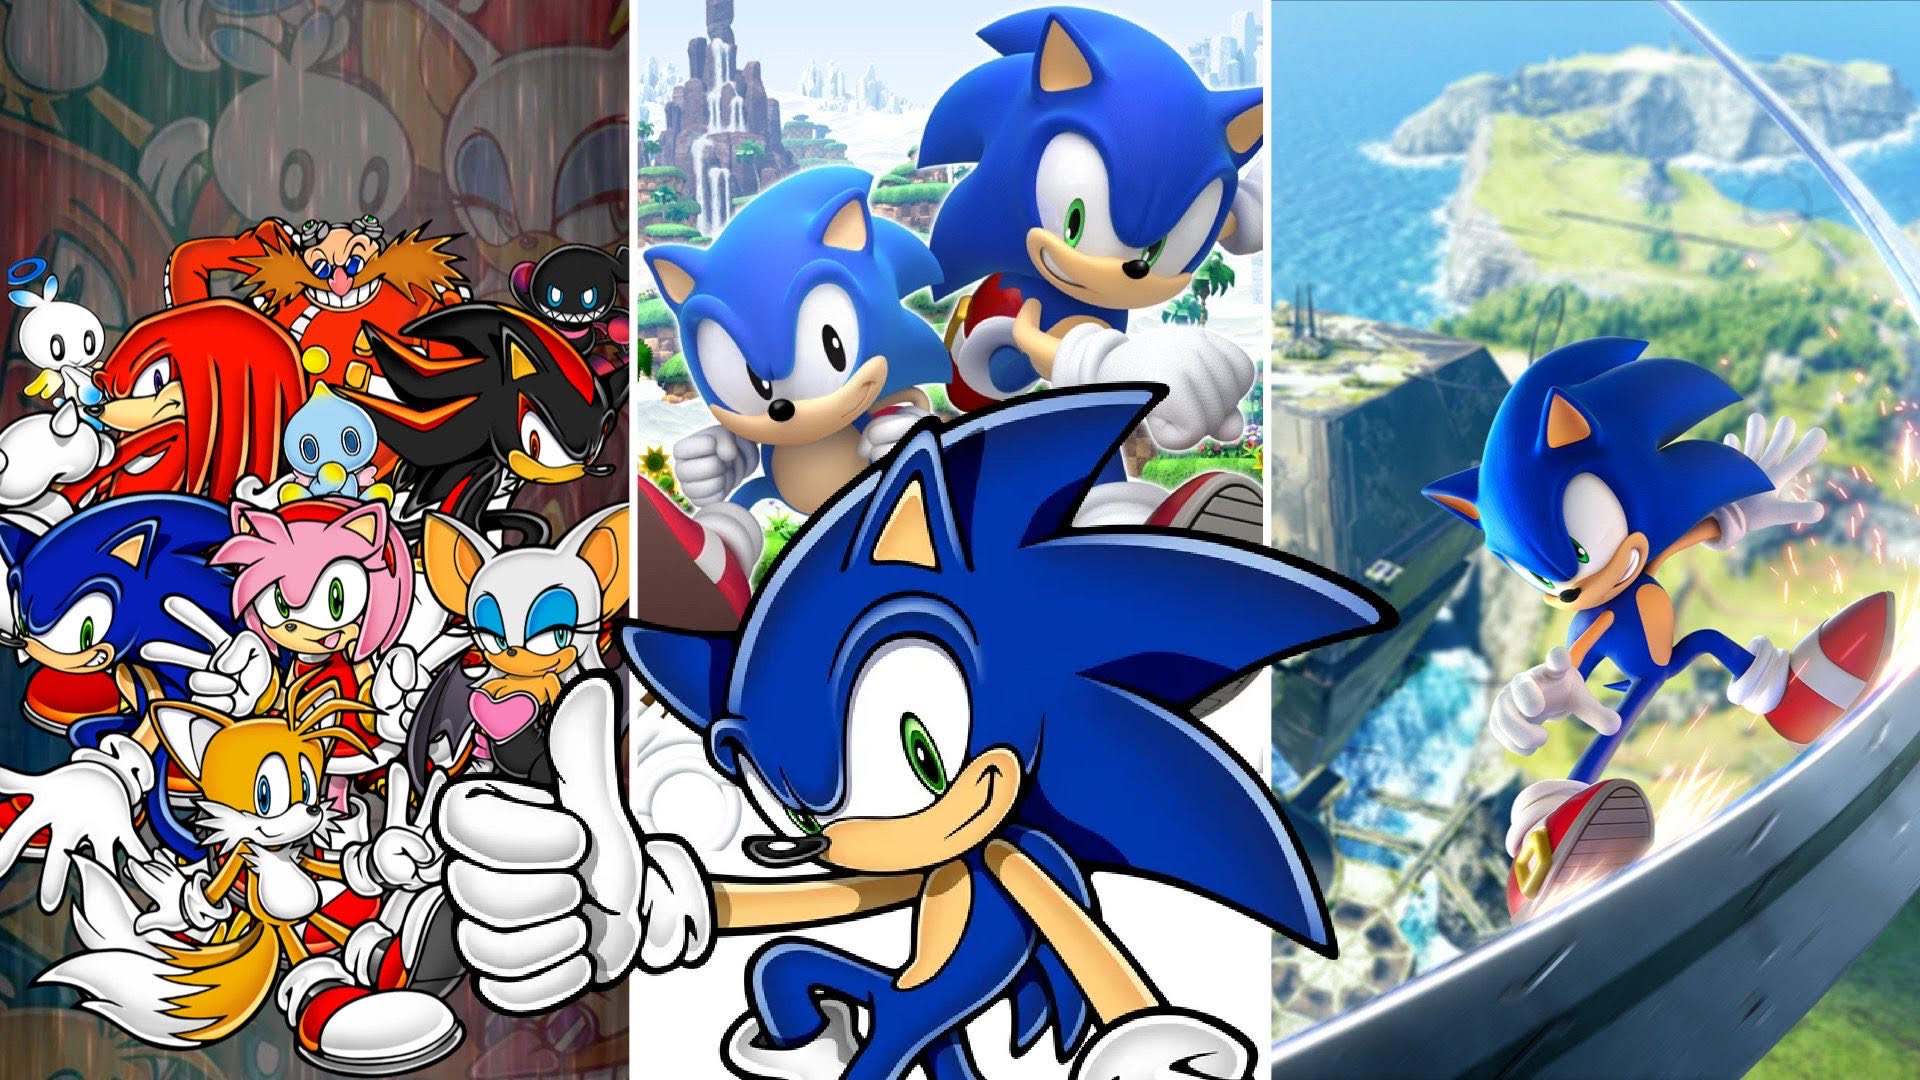 The 10 Best Sonic Games 